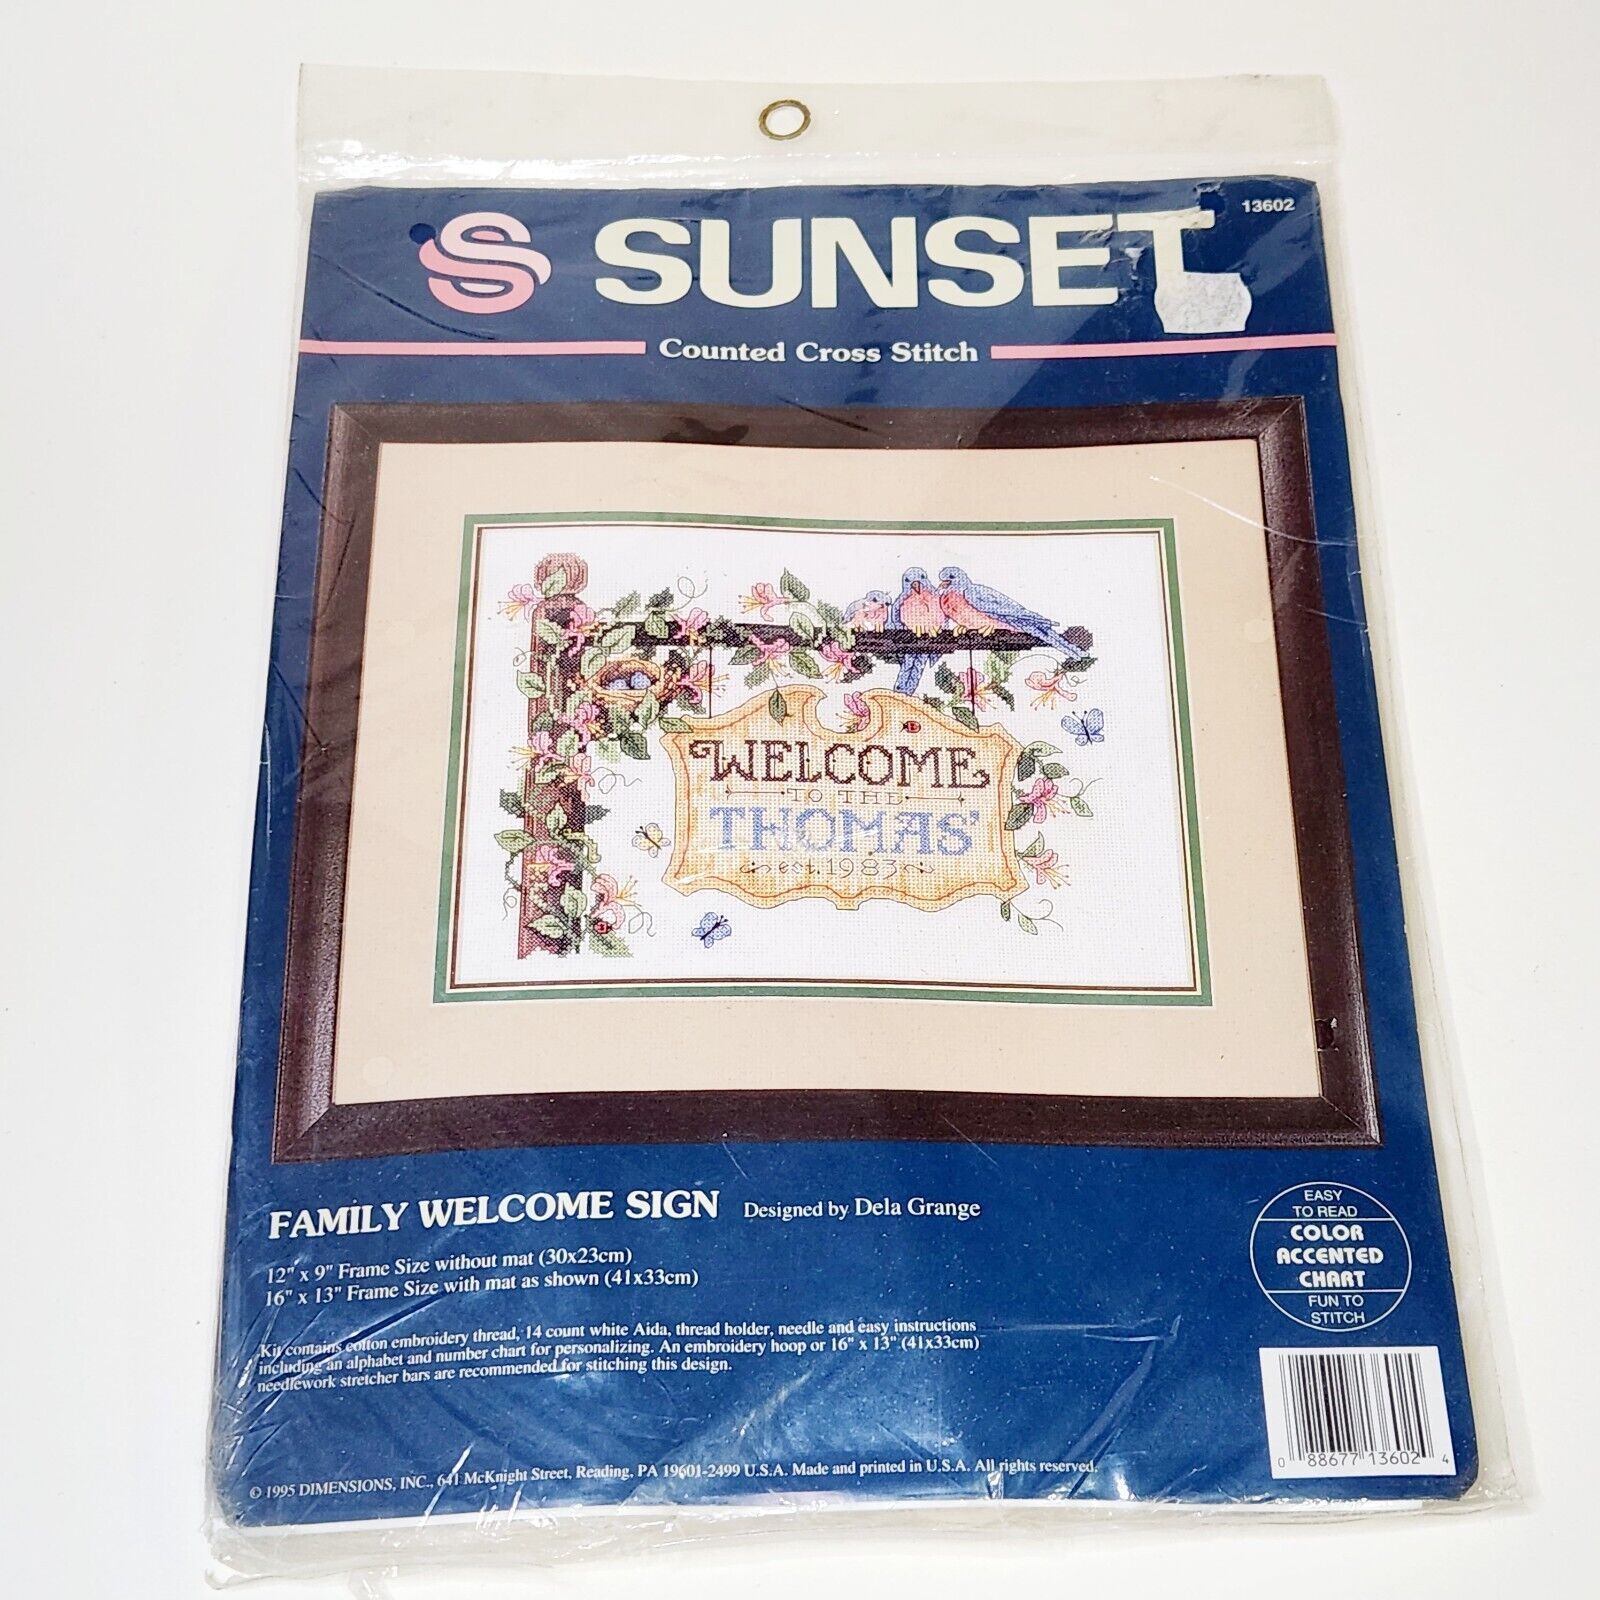 Sunset Family Welcome Sign Counted Cross Stitch #13602 Dimensions - $18.95